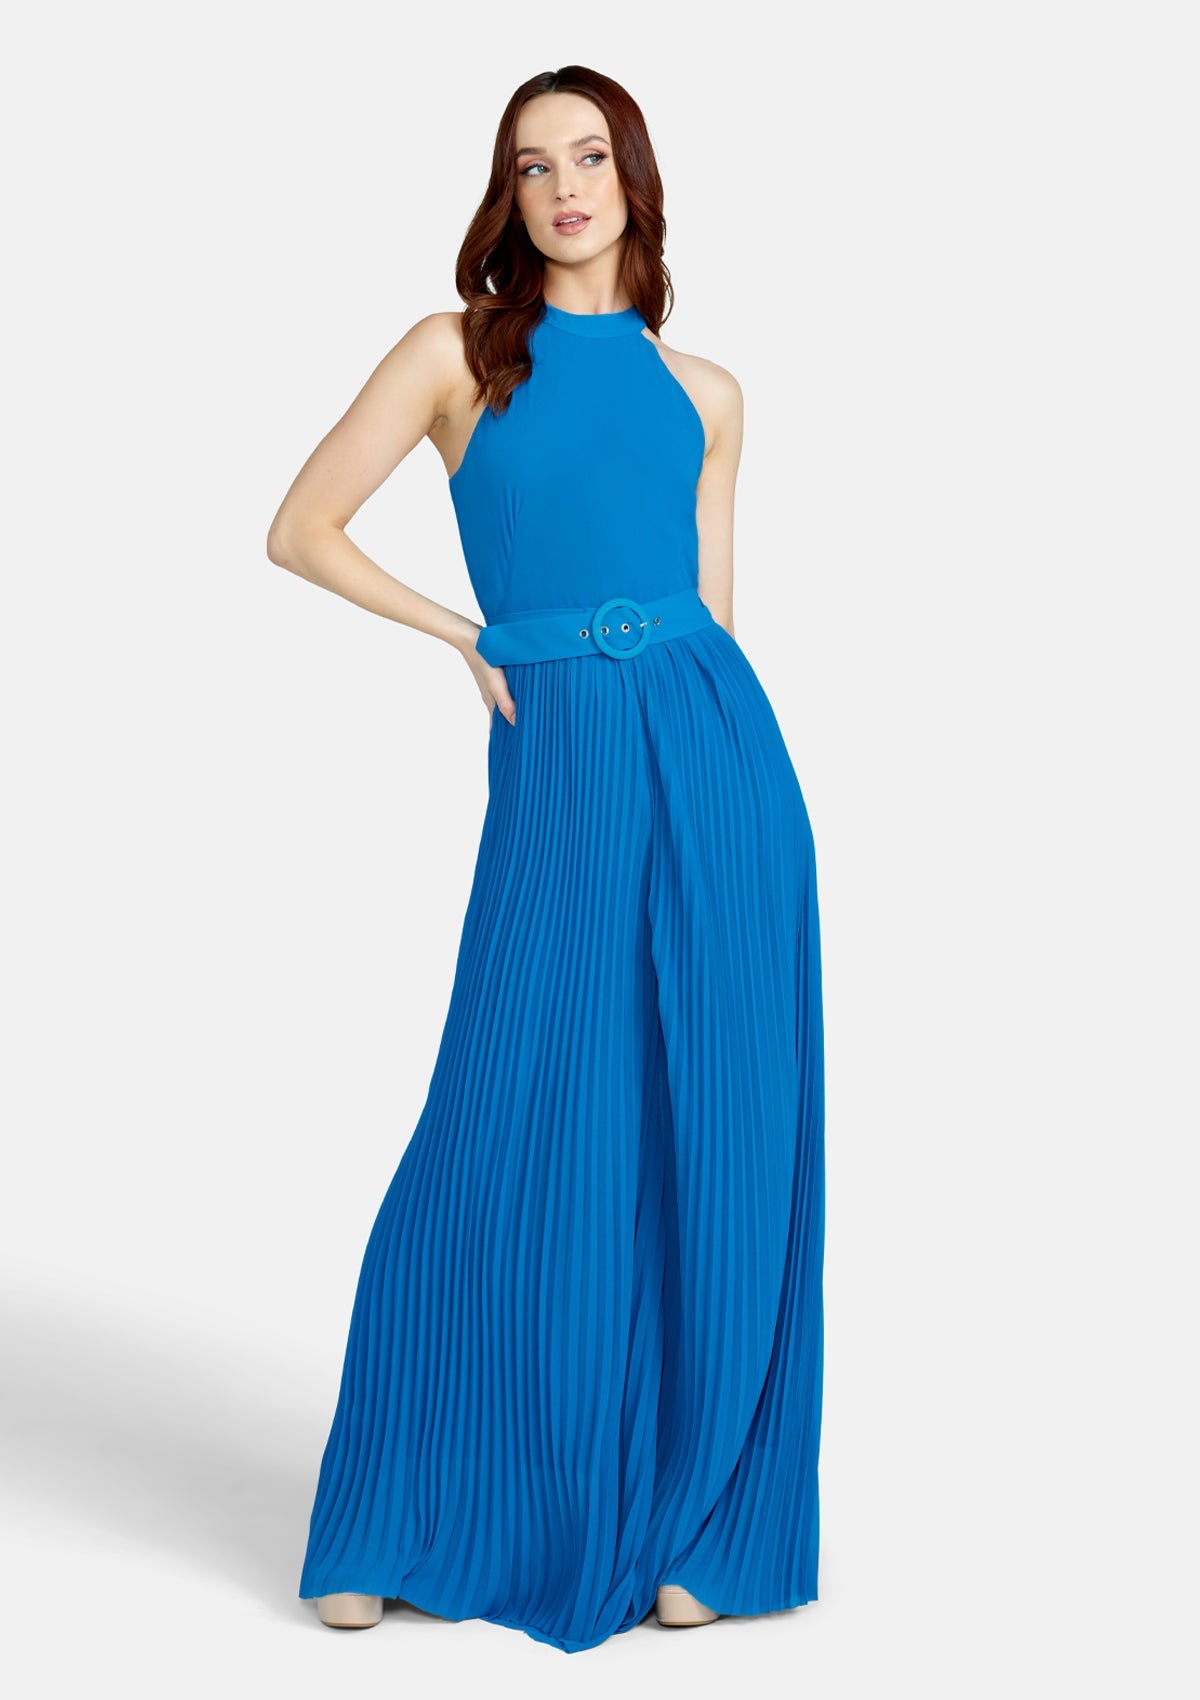 Alloy Apparel Tall Zandaya Pleated Wide Leg Jumpsuit for Women in Blue Size XL | Polyester